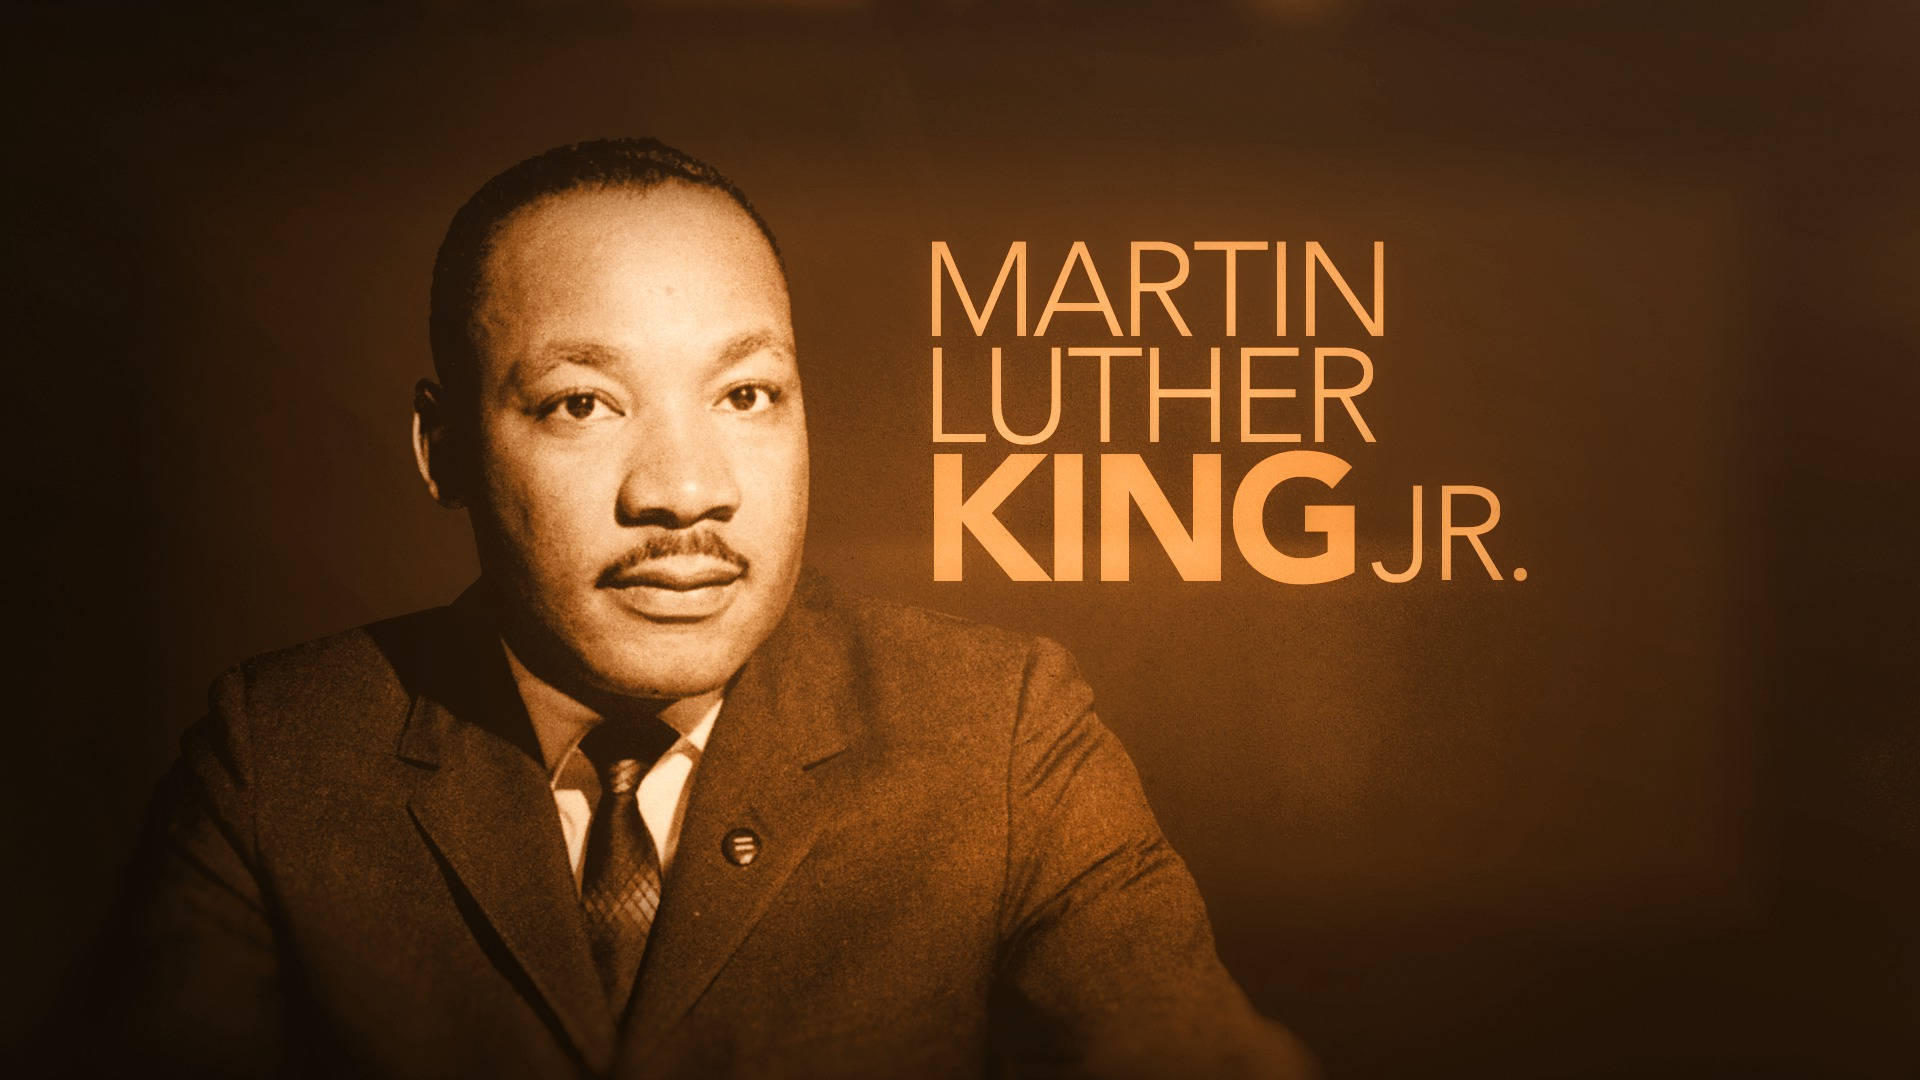 Martin Luther King Jr Sepia Poster Wallpaper